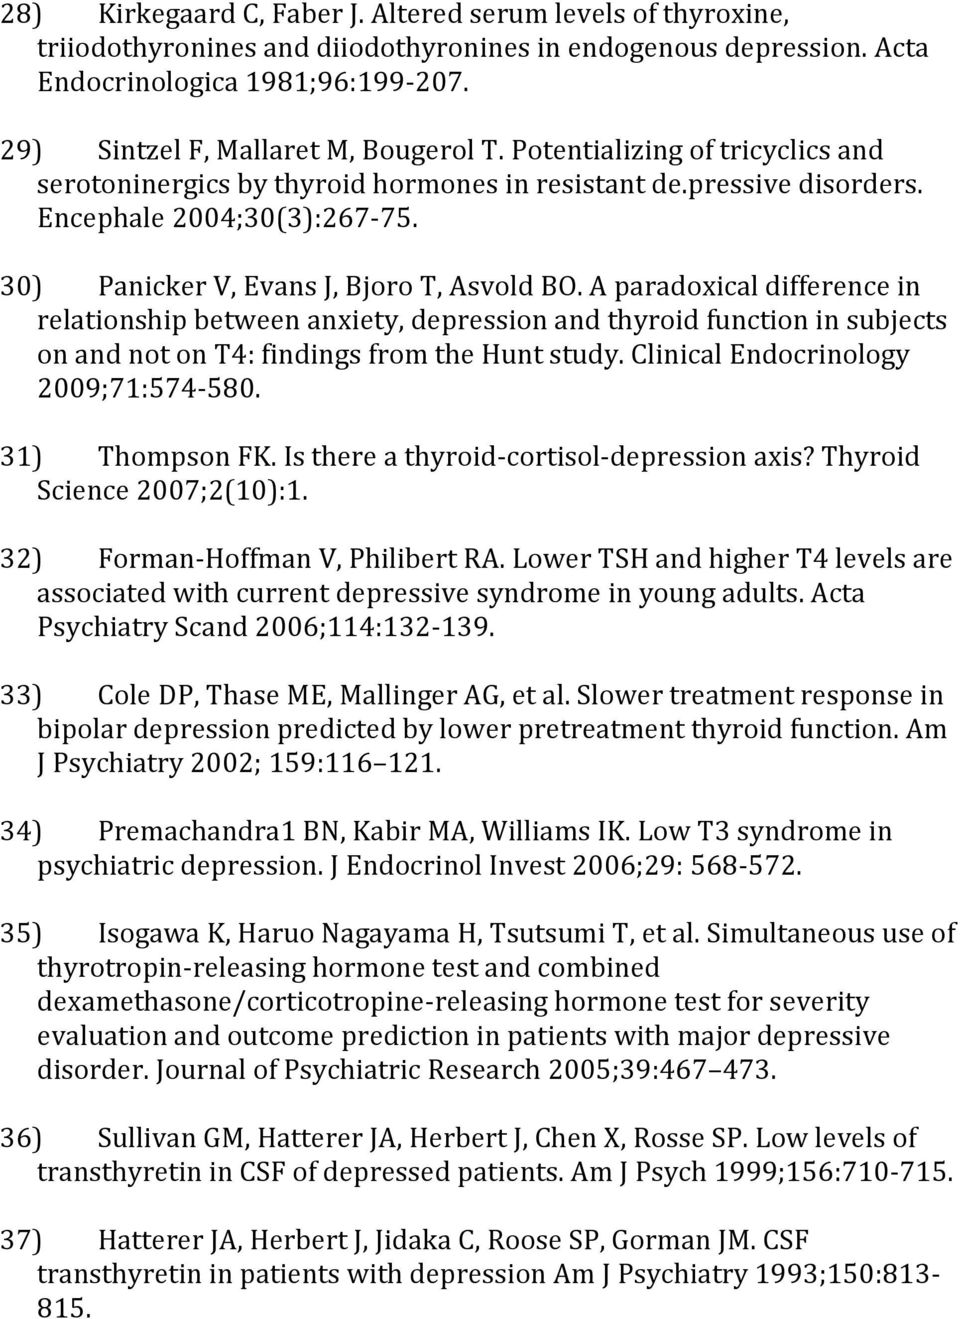 30) Panicker V, Evans J, Bjoro T, Asvold BO. A paradoxical difference in relationship between anxiety, depression and thyroid function in subjects on and not on T4: findings from the Hunt study.